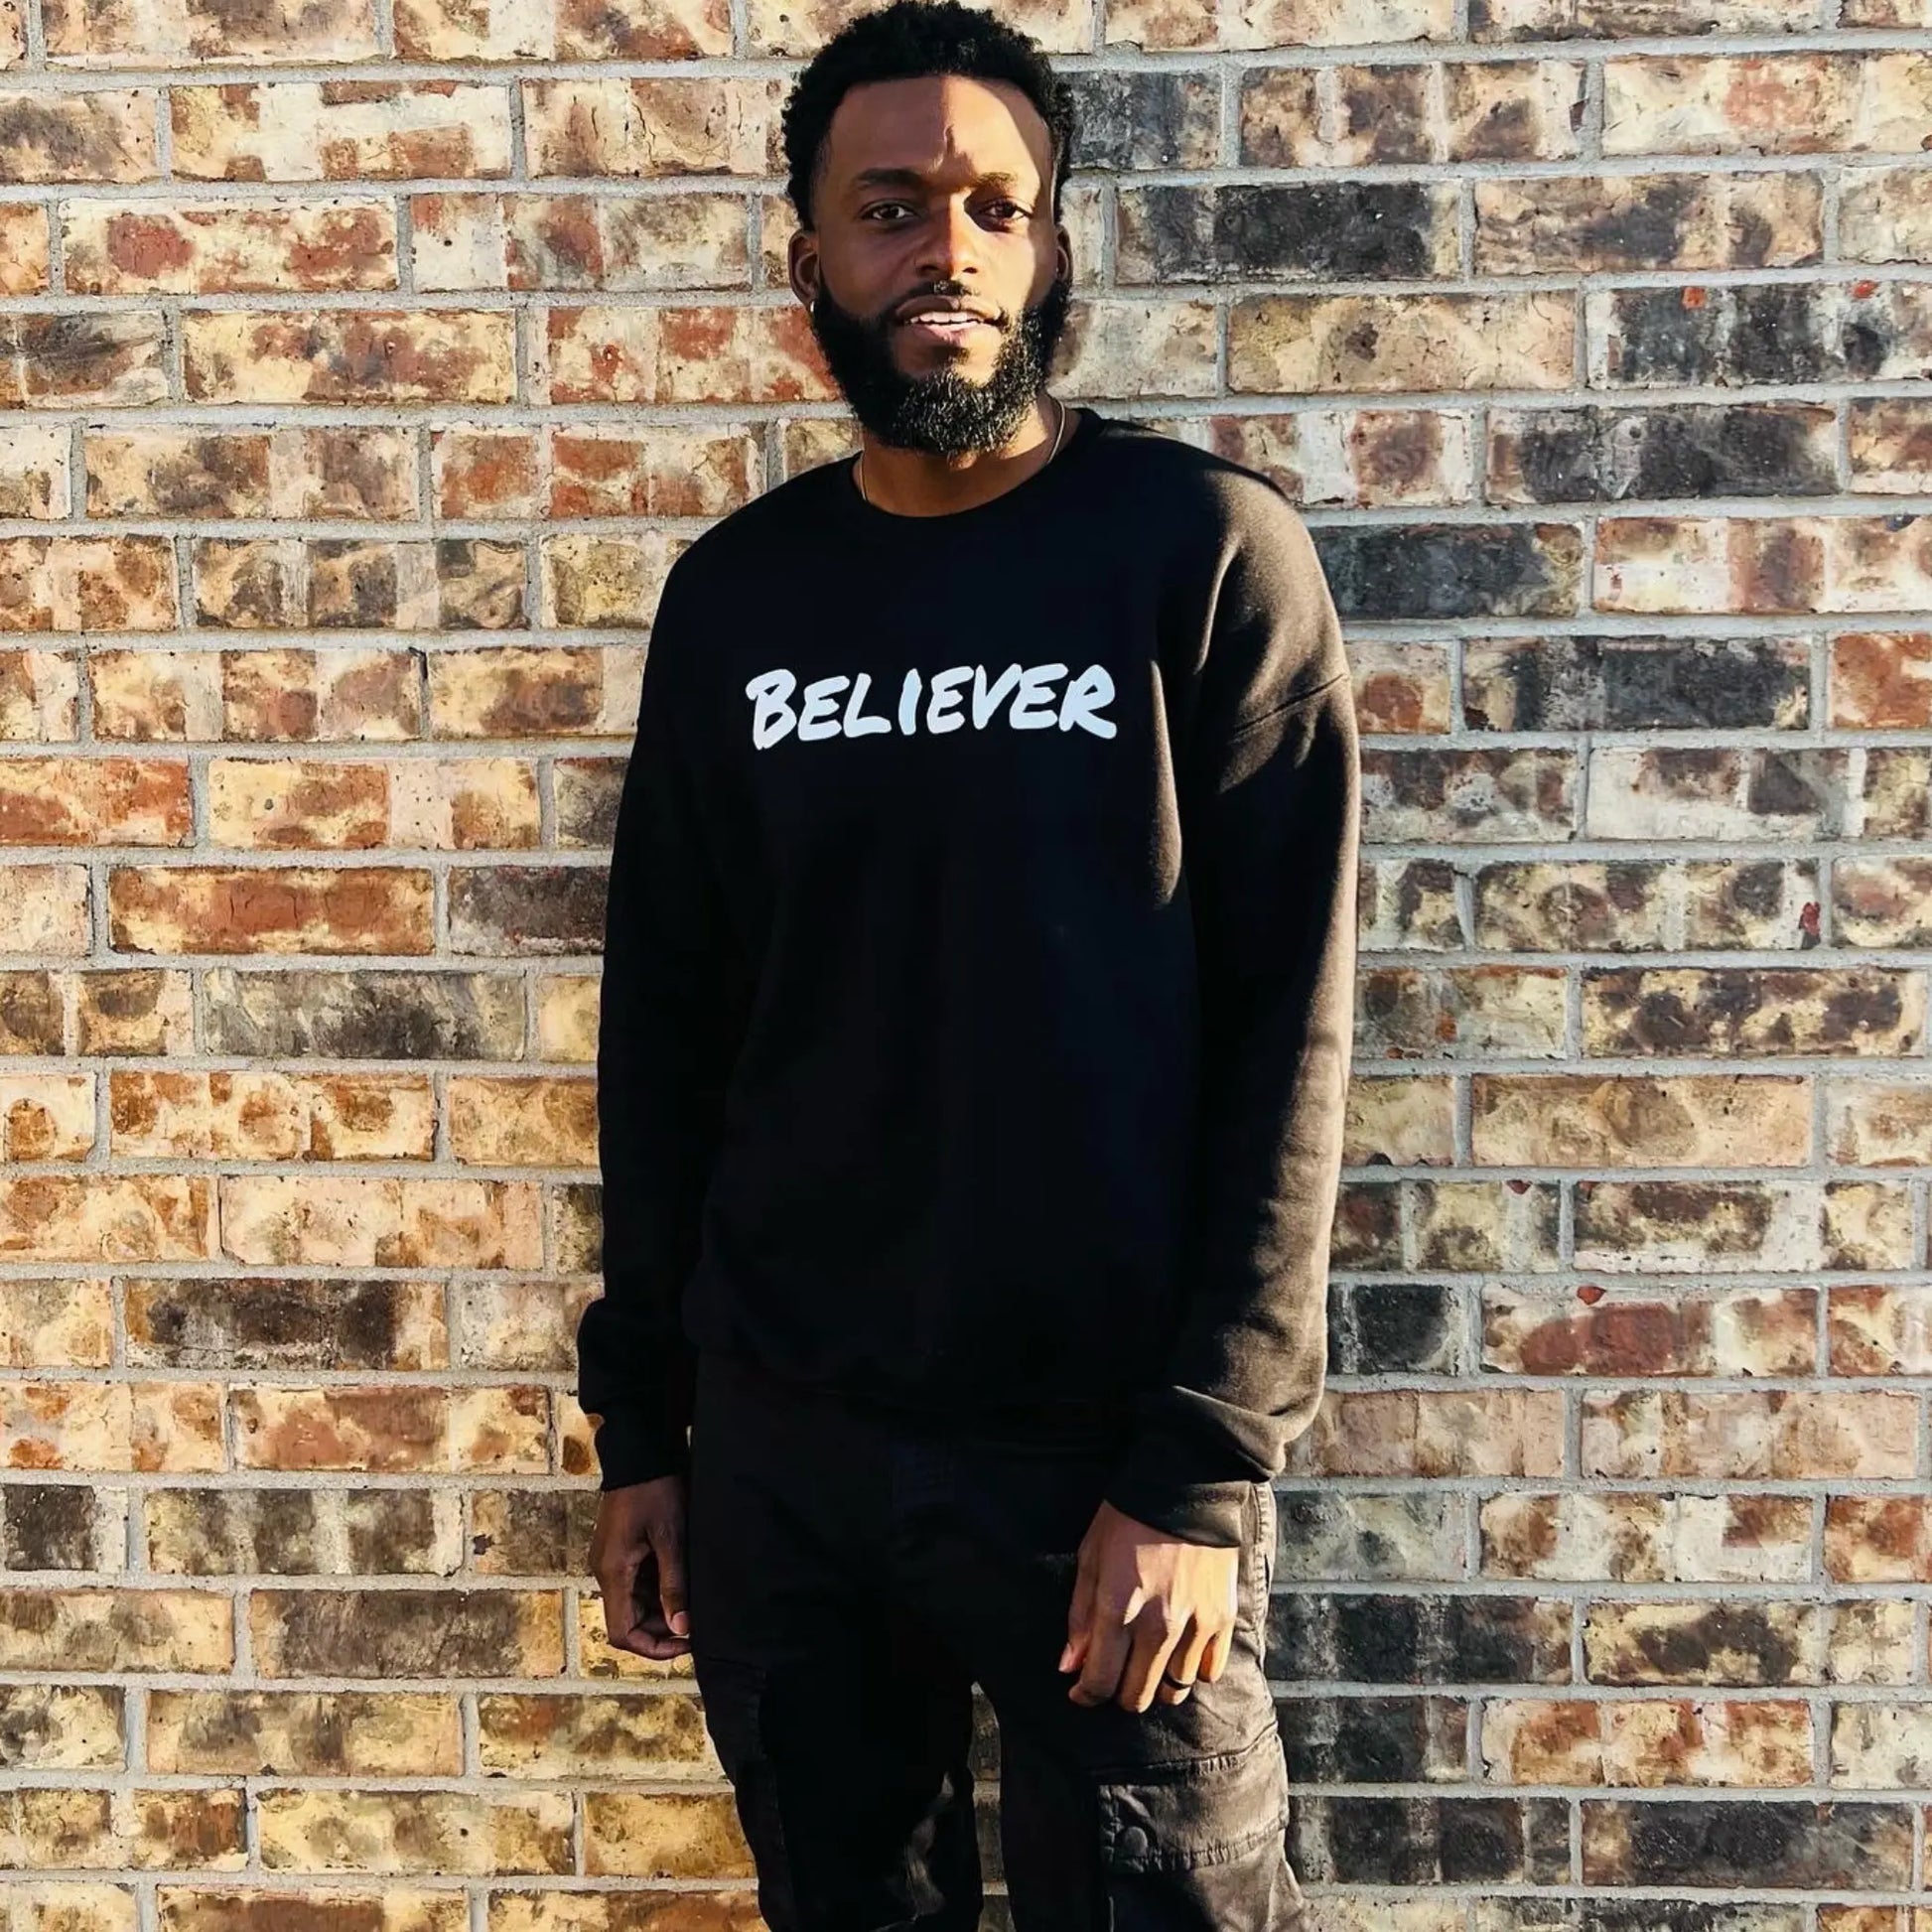 This Sweeatshirt is all black with a crew neck style. The words Believer are pressed on the shirt in bold white letters. Believer is written across the chest, stretching from sholder to shoulder. The sweatshirt this comftorable and fitted. Size up for an oversized look. Edit alt text. On a Nuetral Colored back ground. The back reads John 3:16 on the tail of the sweatshirt.